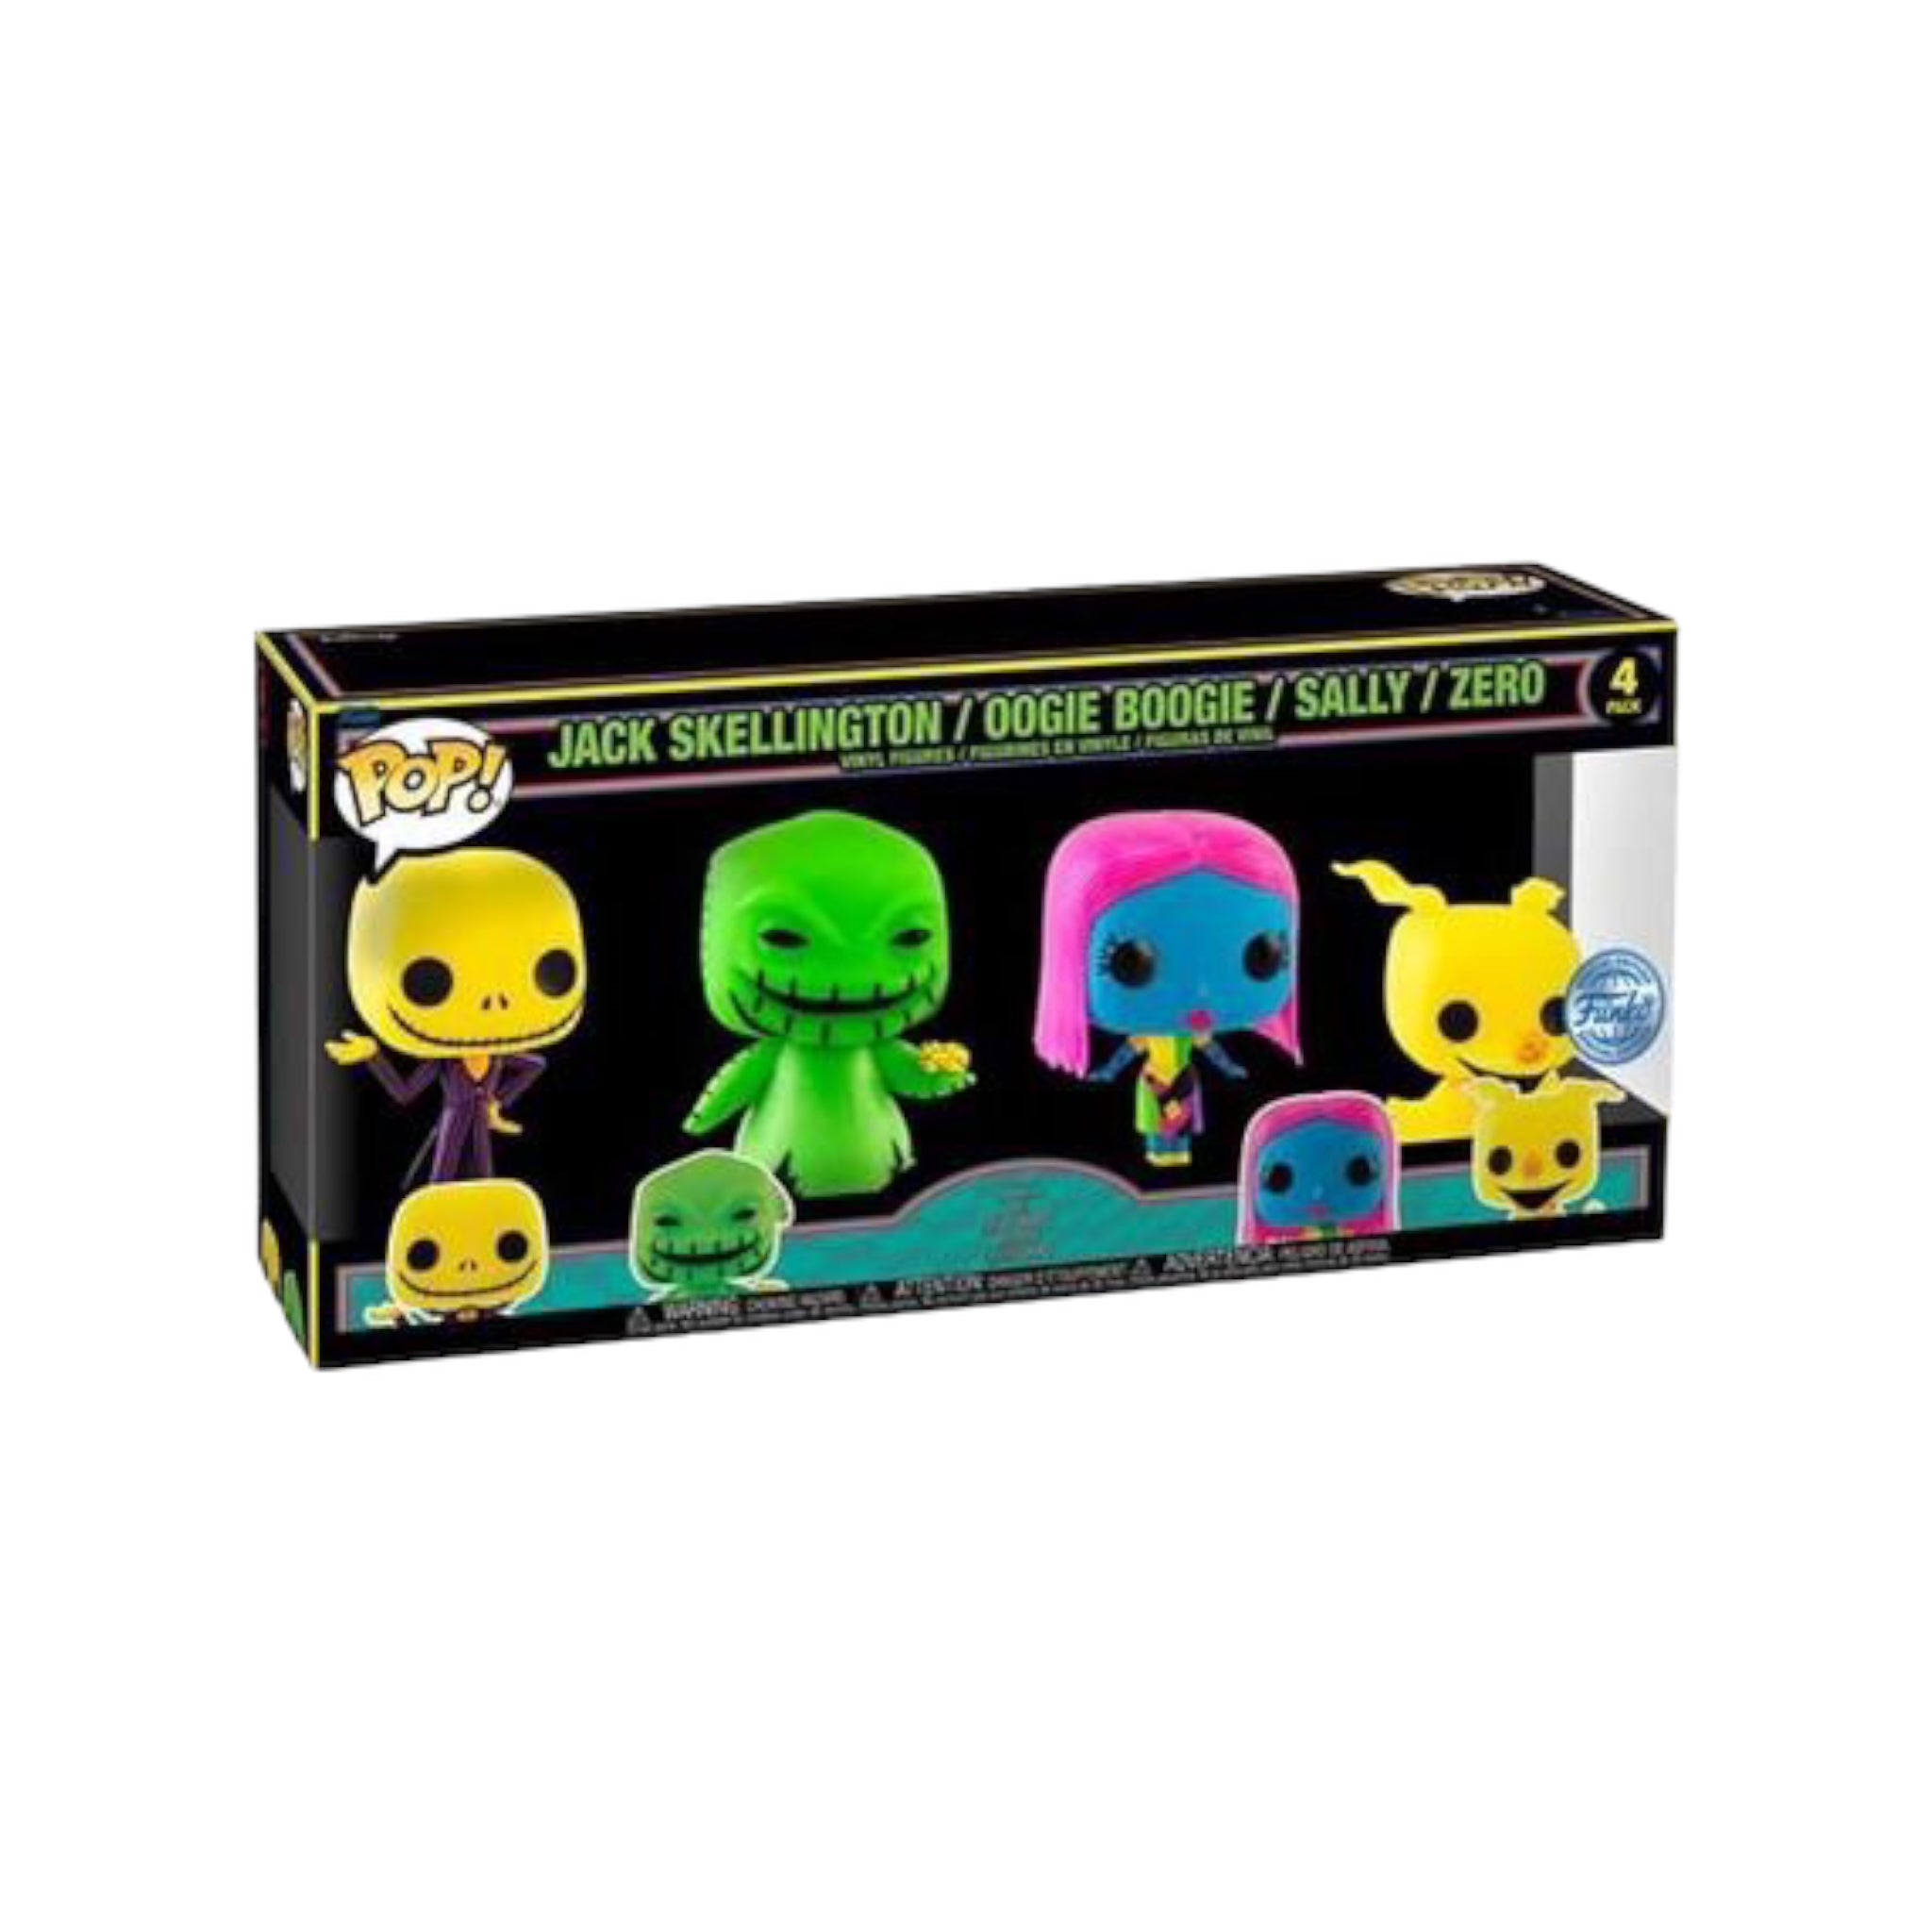 Jack Skellington / Oogie Boogie / Sally / Zero (Black Light) 4 Pack Funko Pop! - The Nightmare Before Christmas - Special Edition - Condition 8.5/10